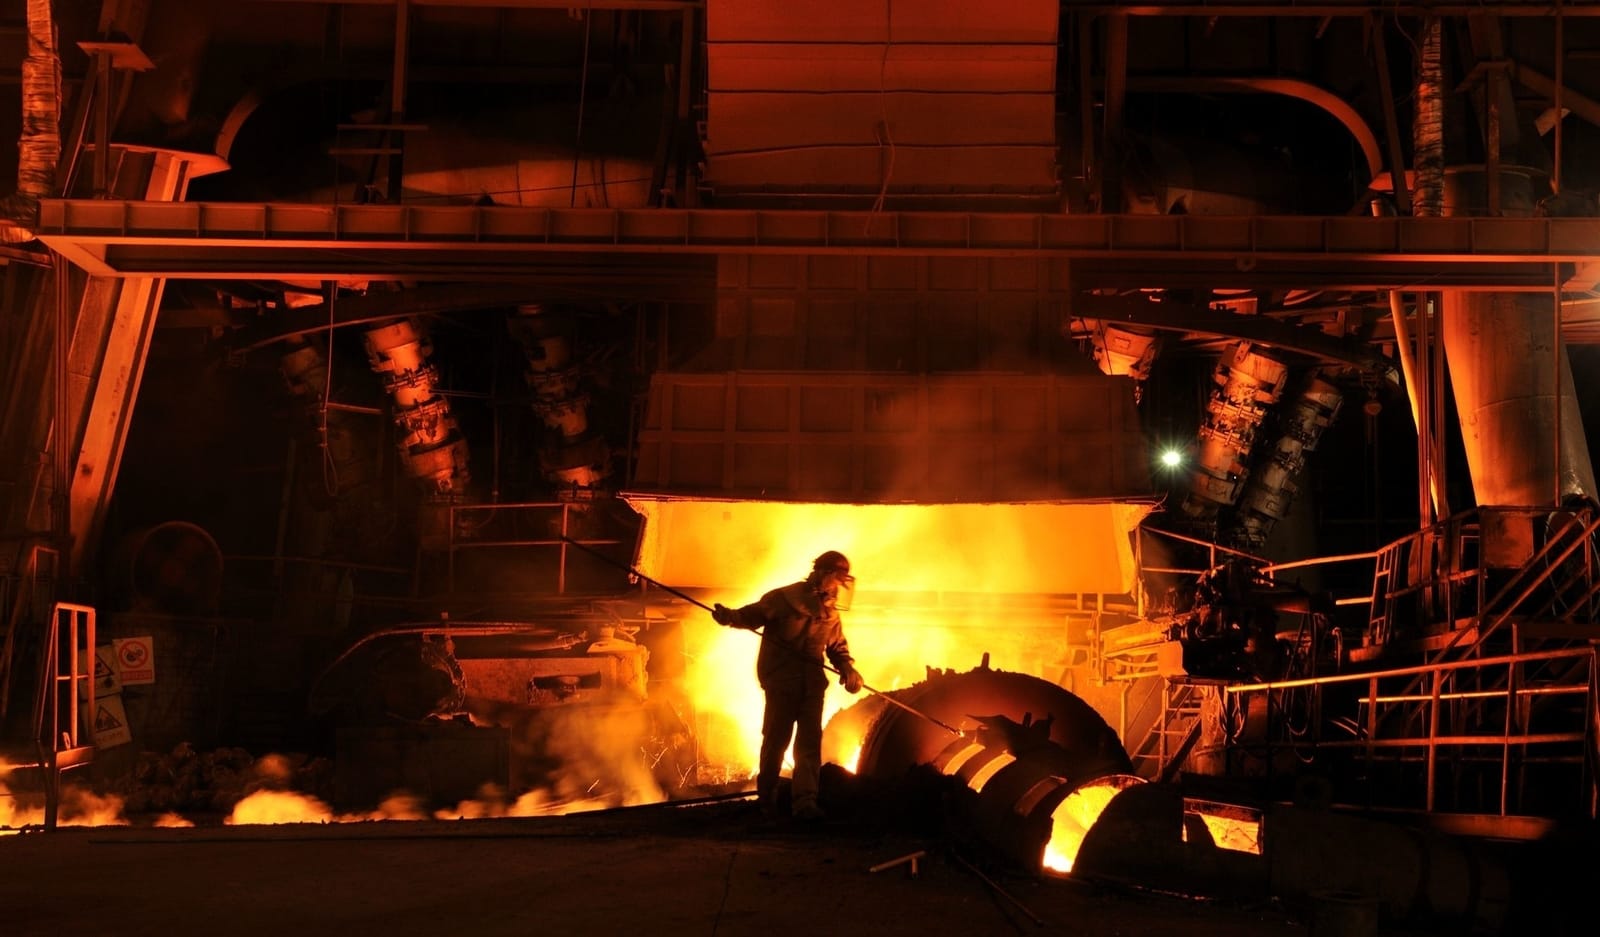 History Of Steel Manufacturing in Australia